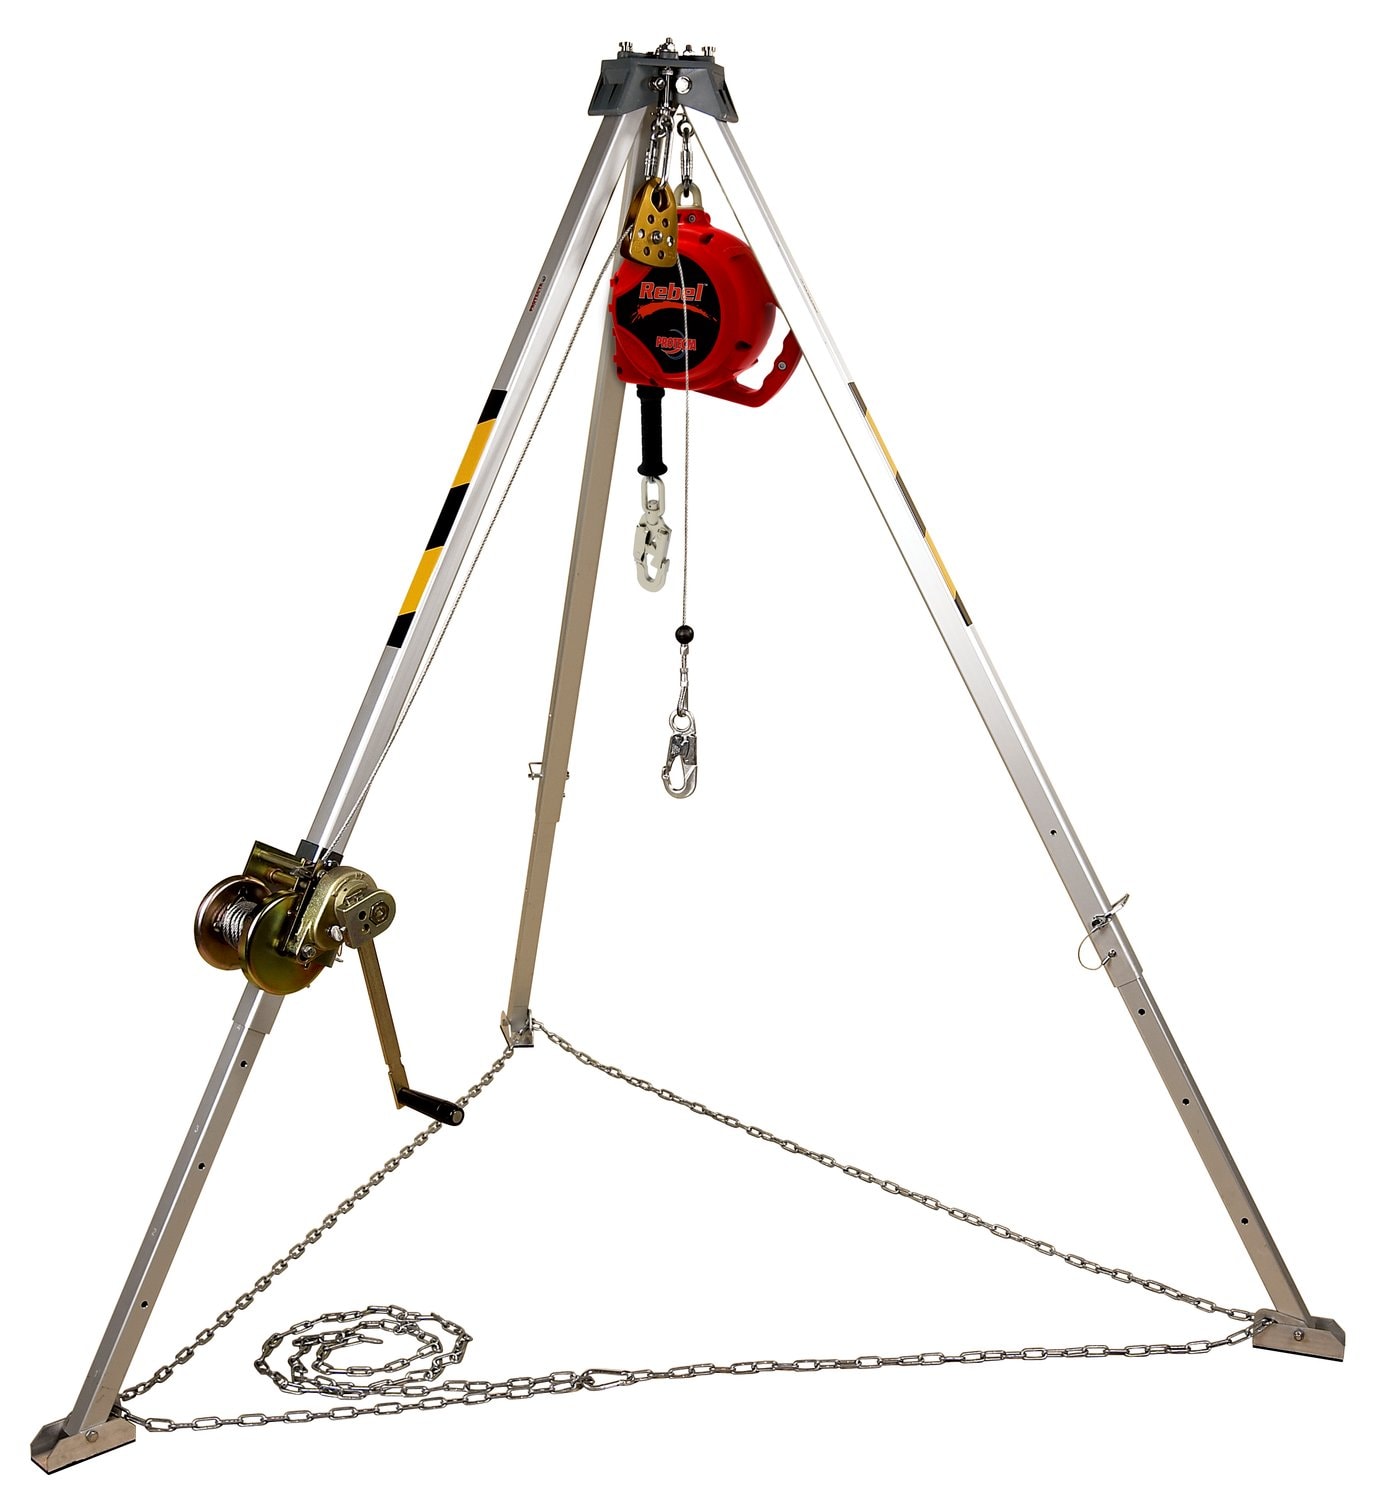 7012286255 - 3M Protecta Confined Space Aluminum Tripod with Winch/SRL/Harness AA805AG, 8 ft High, 50 ft and 50 ft Galvanized Cable